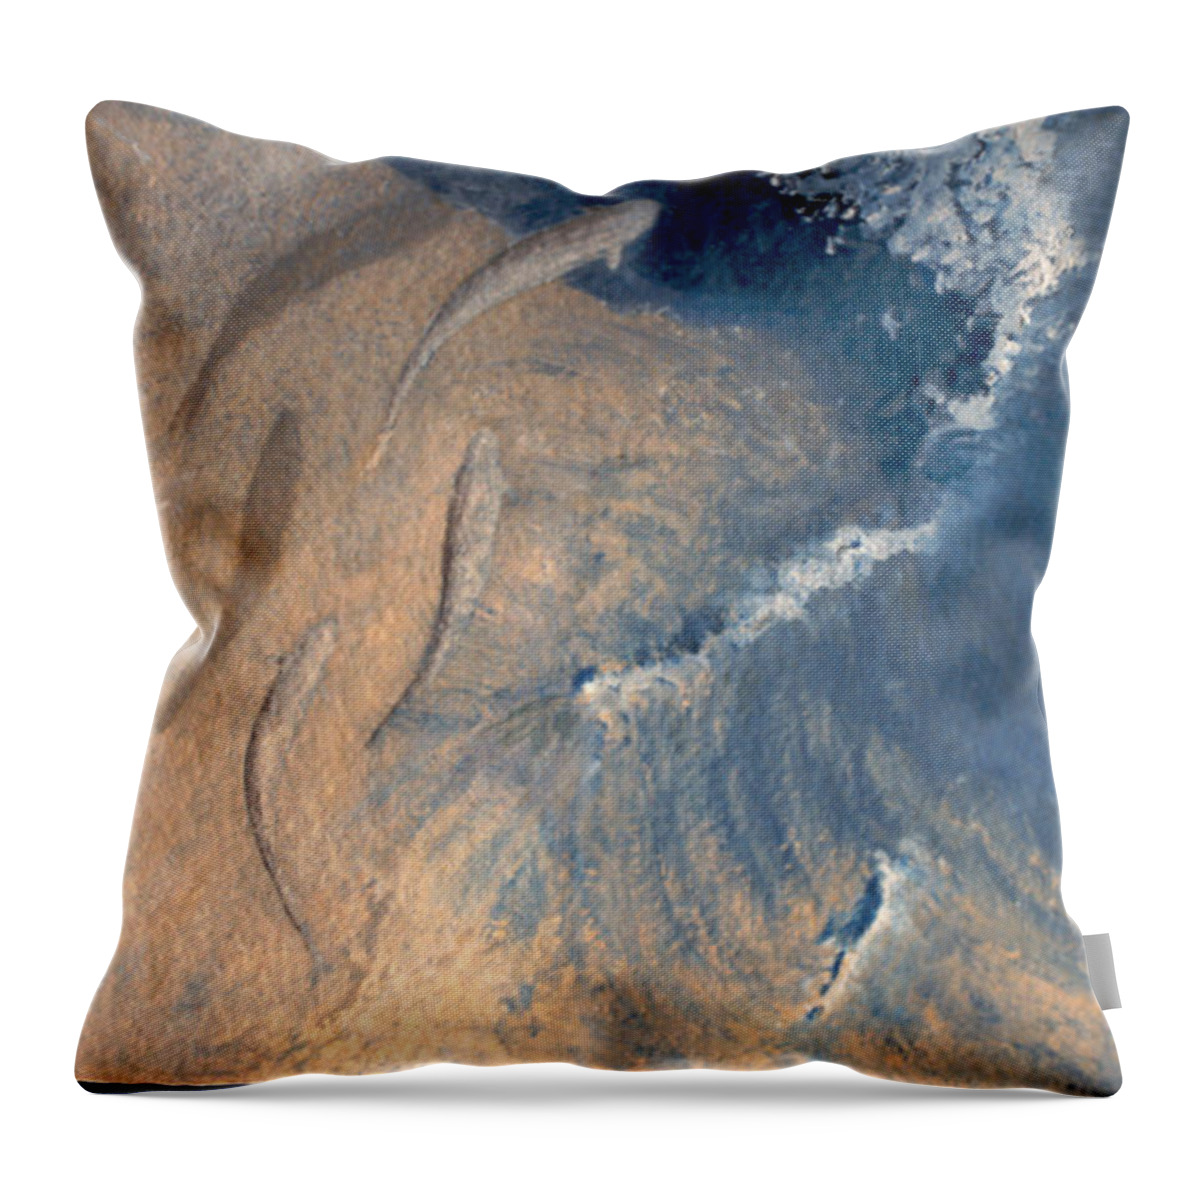 Seascape Throw Pillow featuring the painting Ocean by Steve Karol